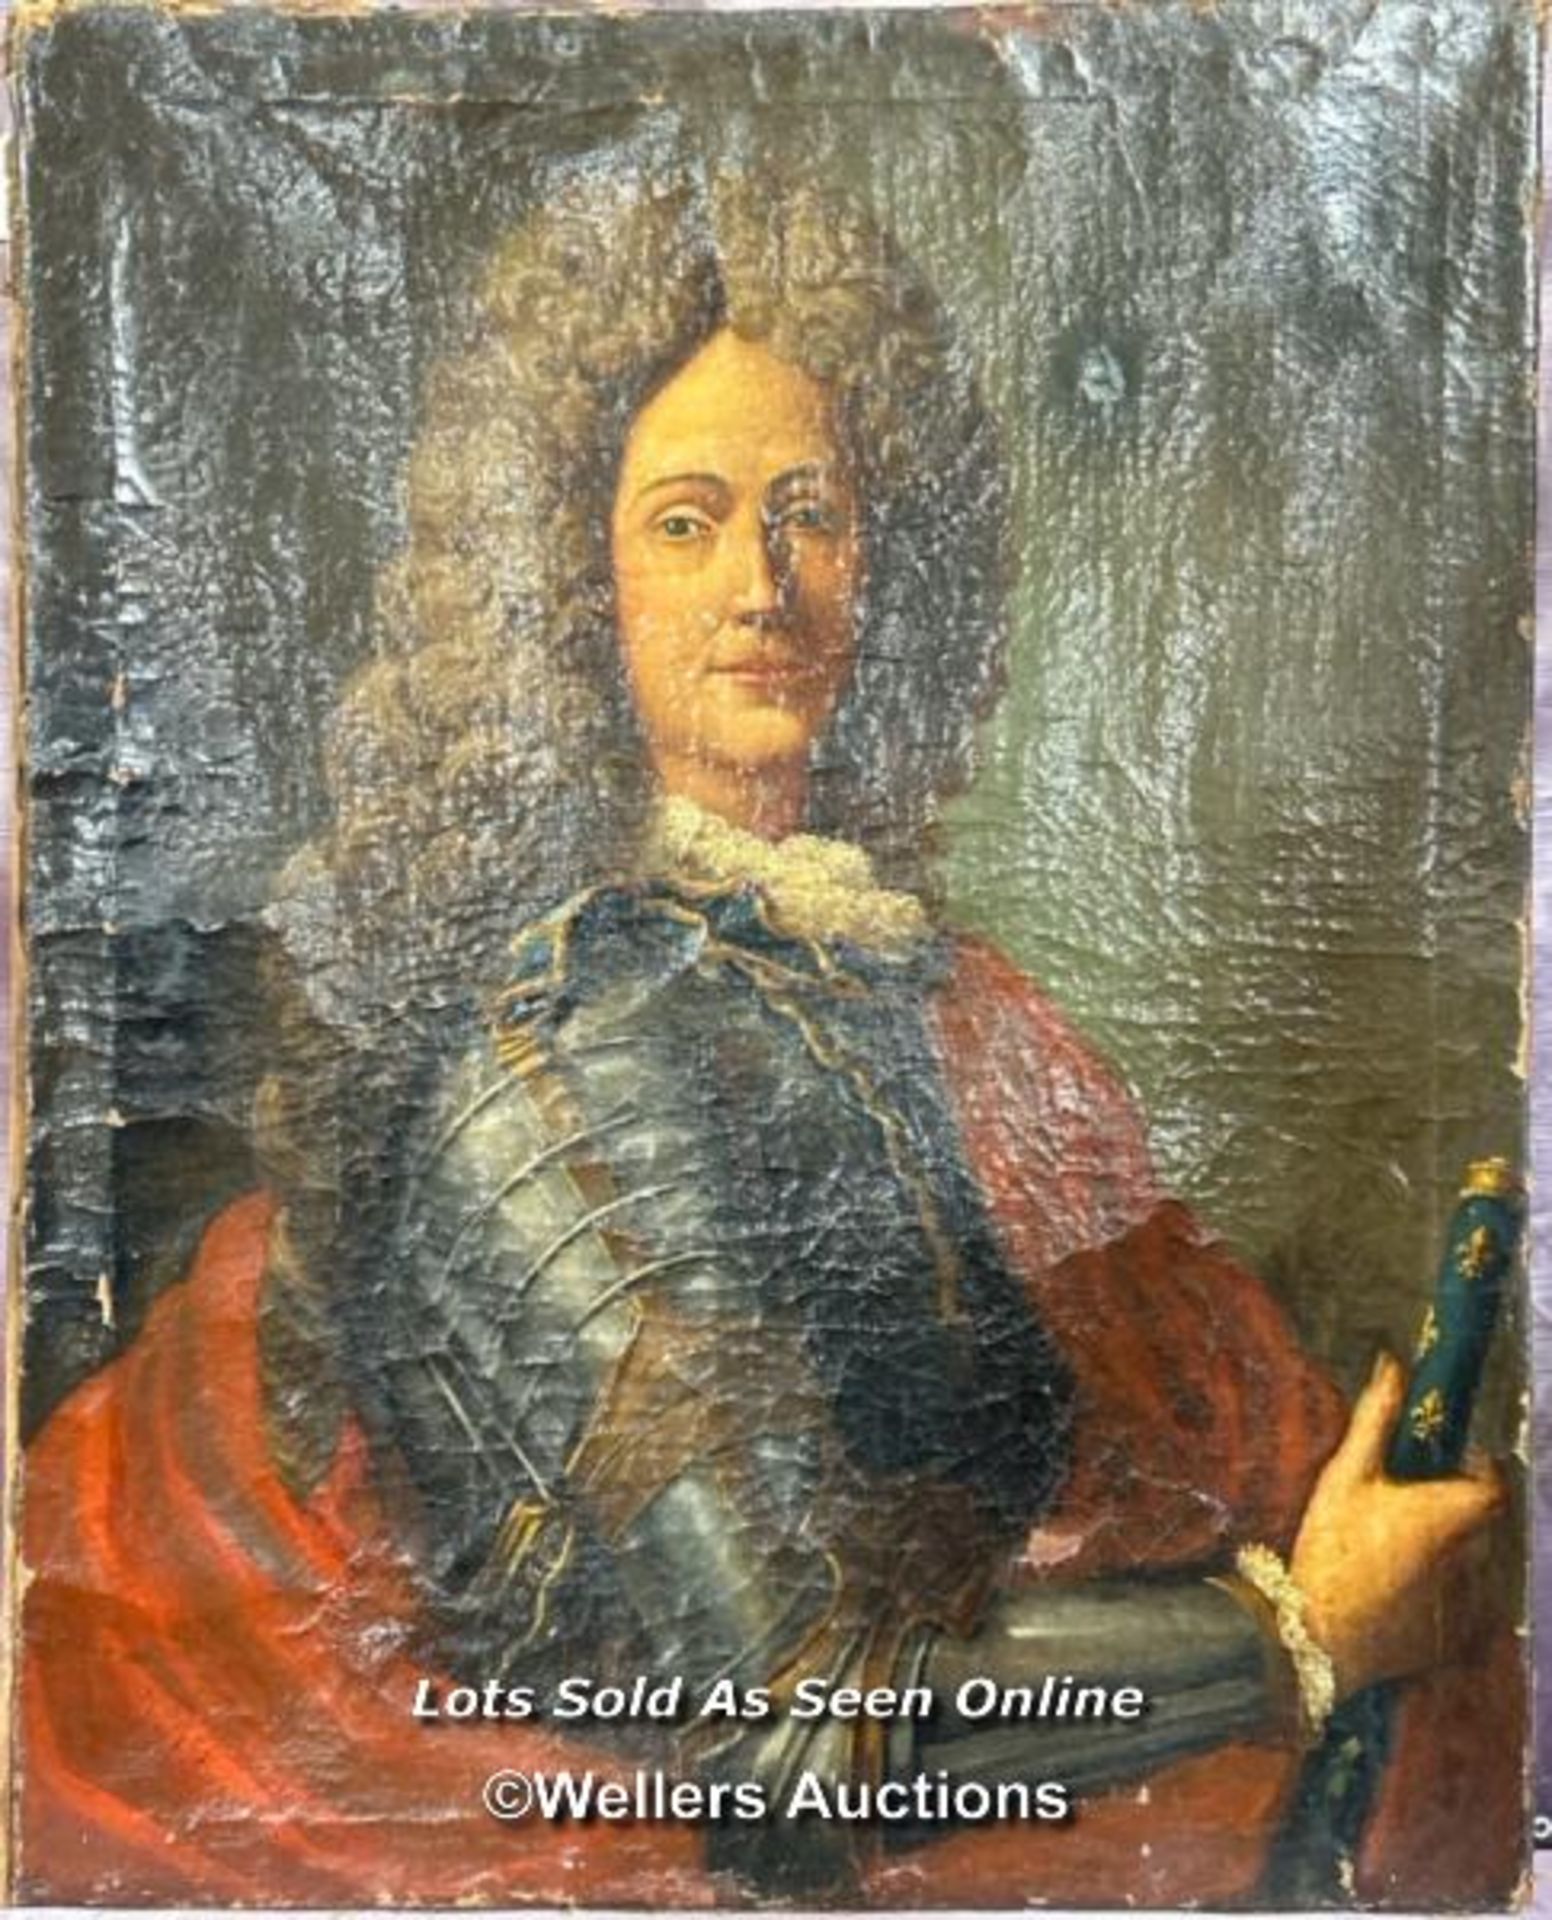 EARLY 18TH CENTURY PORTRAIT OF A NOBLEMAN IN ARMOUR, 80 X 64CM